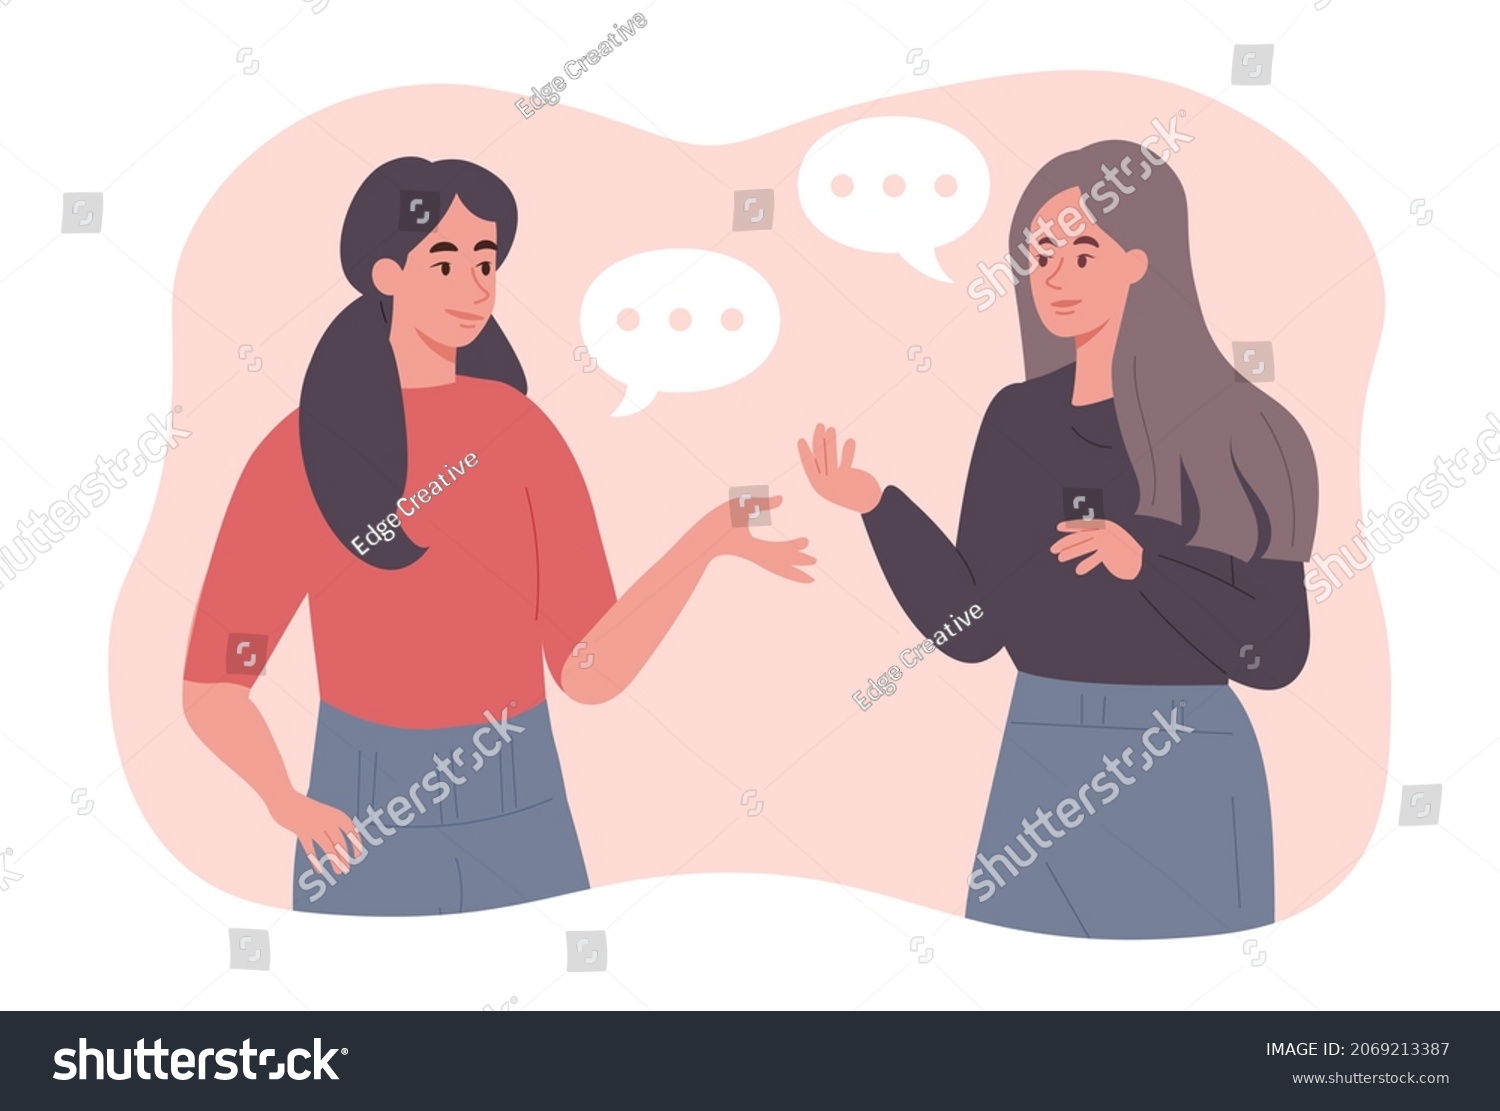 Two women talking to each other concept. Female characters communicate and discuss news. Friends have dialogue about their affairs and hobbies. Speech bubble. Cartoon modern flat vector illustration #2069213387